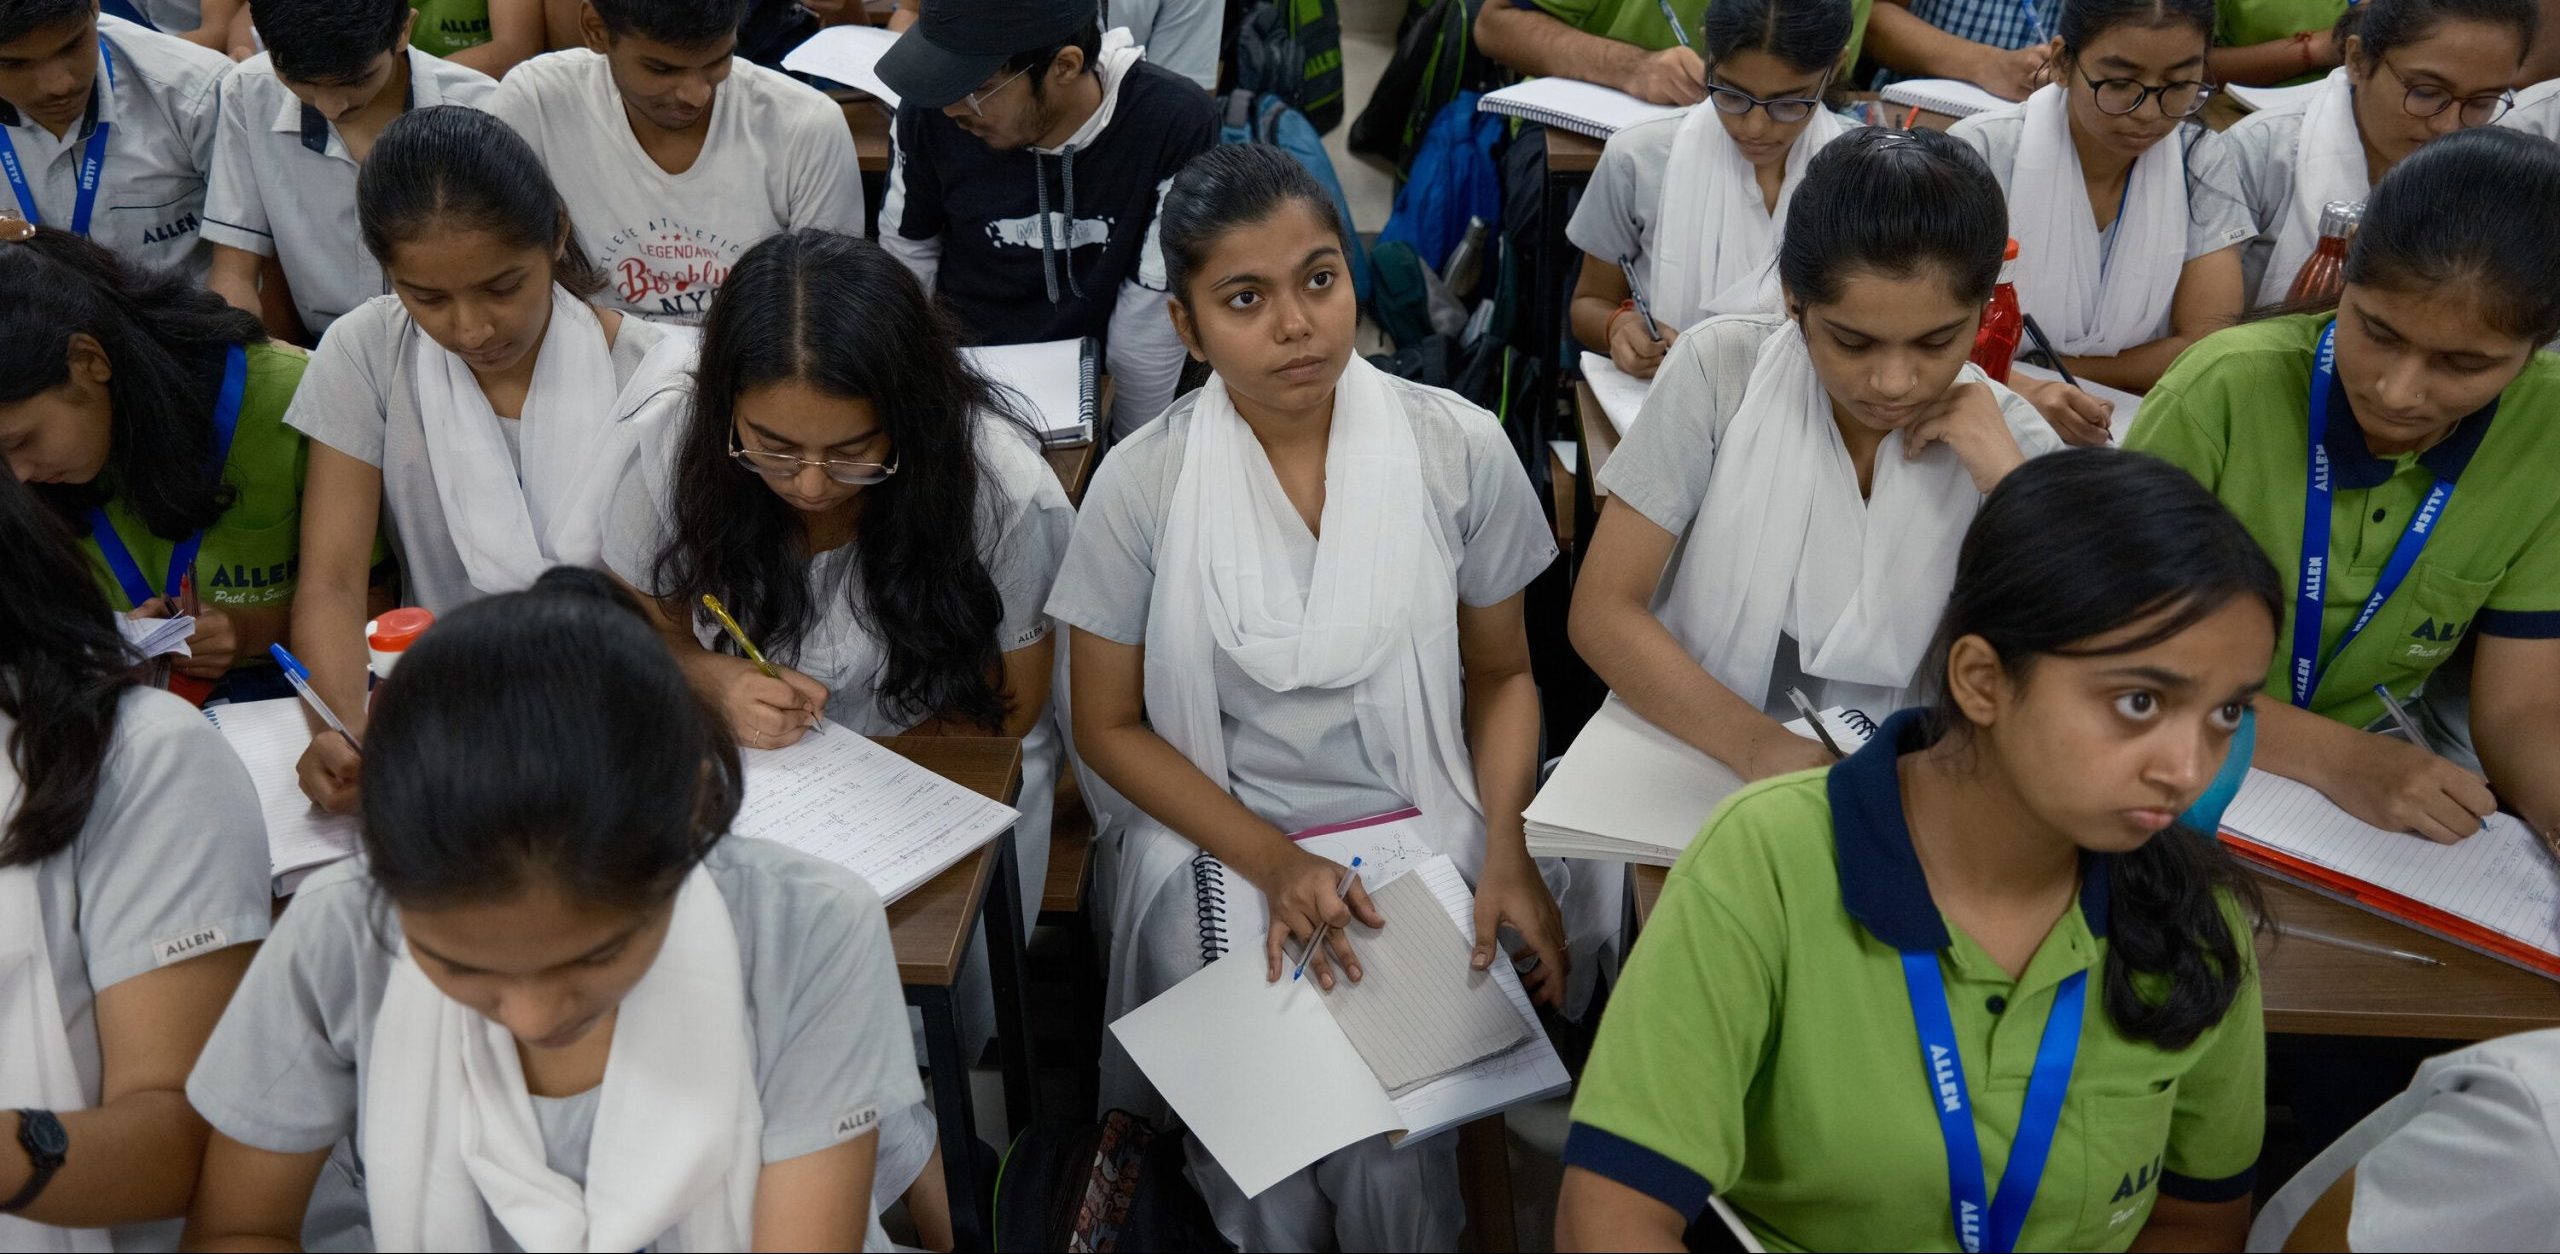 Millions of Students Affected by Controversies in India's Premier Medical and Research Exams